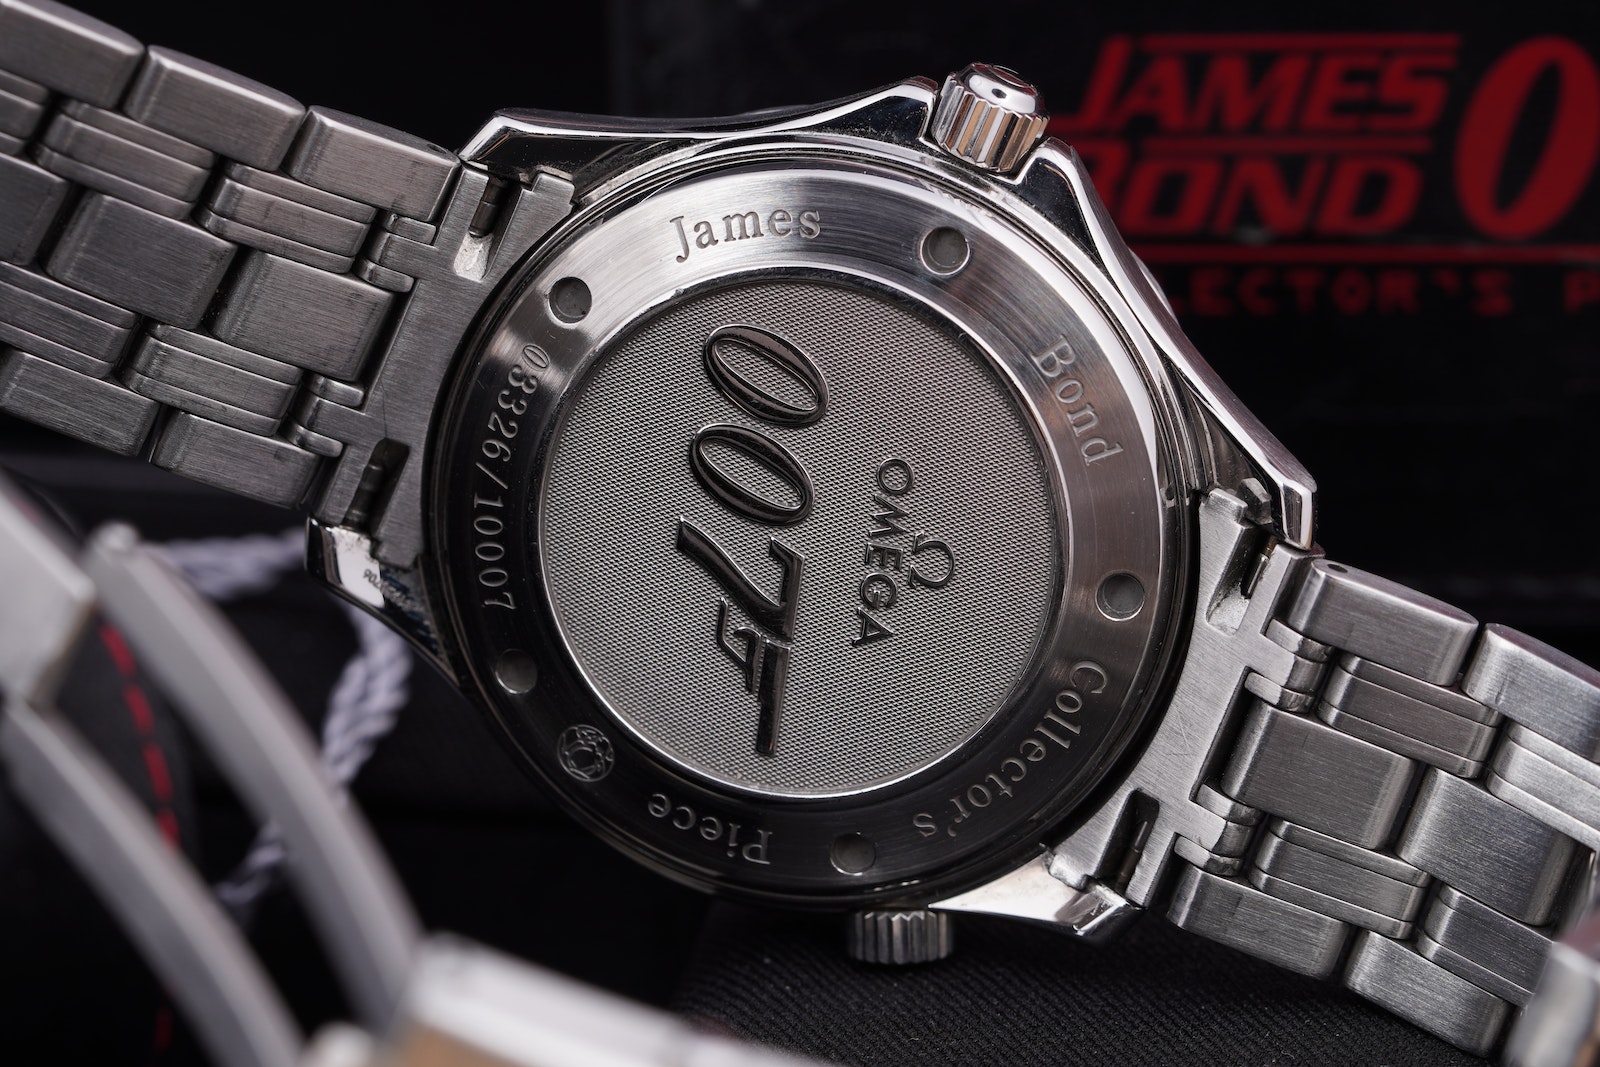 A Luxury Omega Wristwatch James Bond 007 Collector's Piece Edition